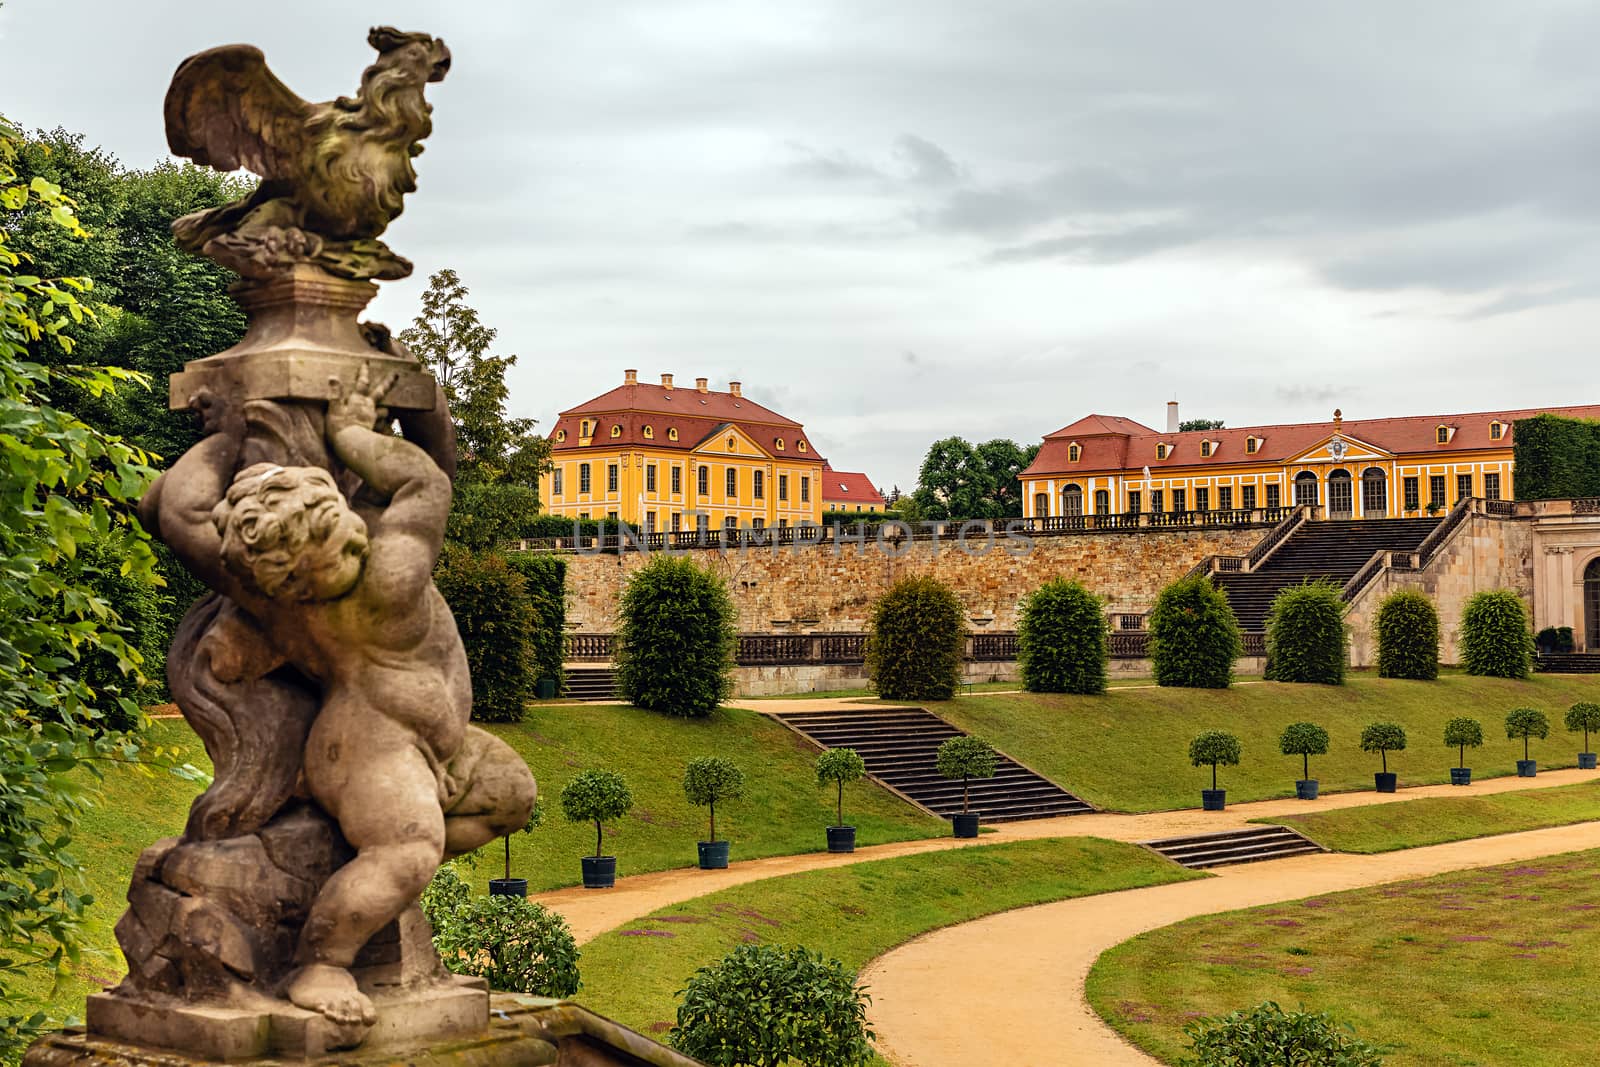 Friedrich Castle, orangery and statues in the Grosssedlitz Baroq by seka33